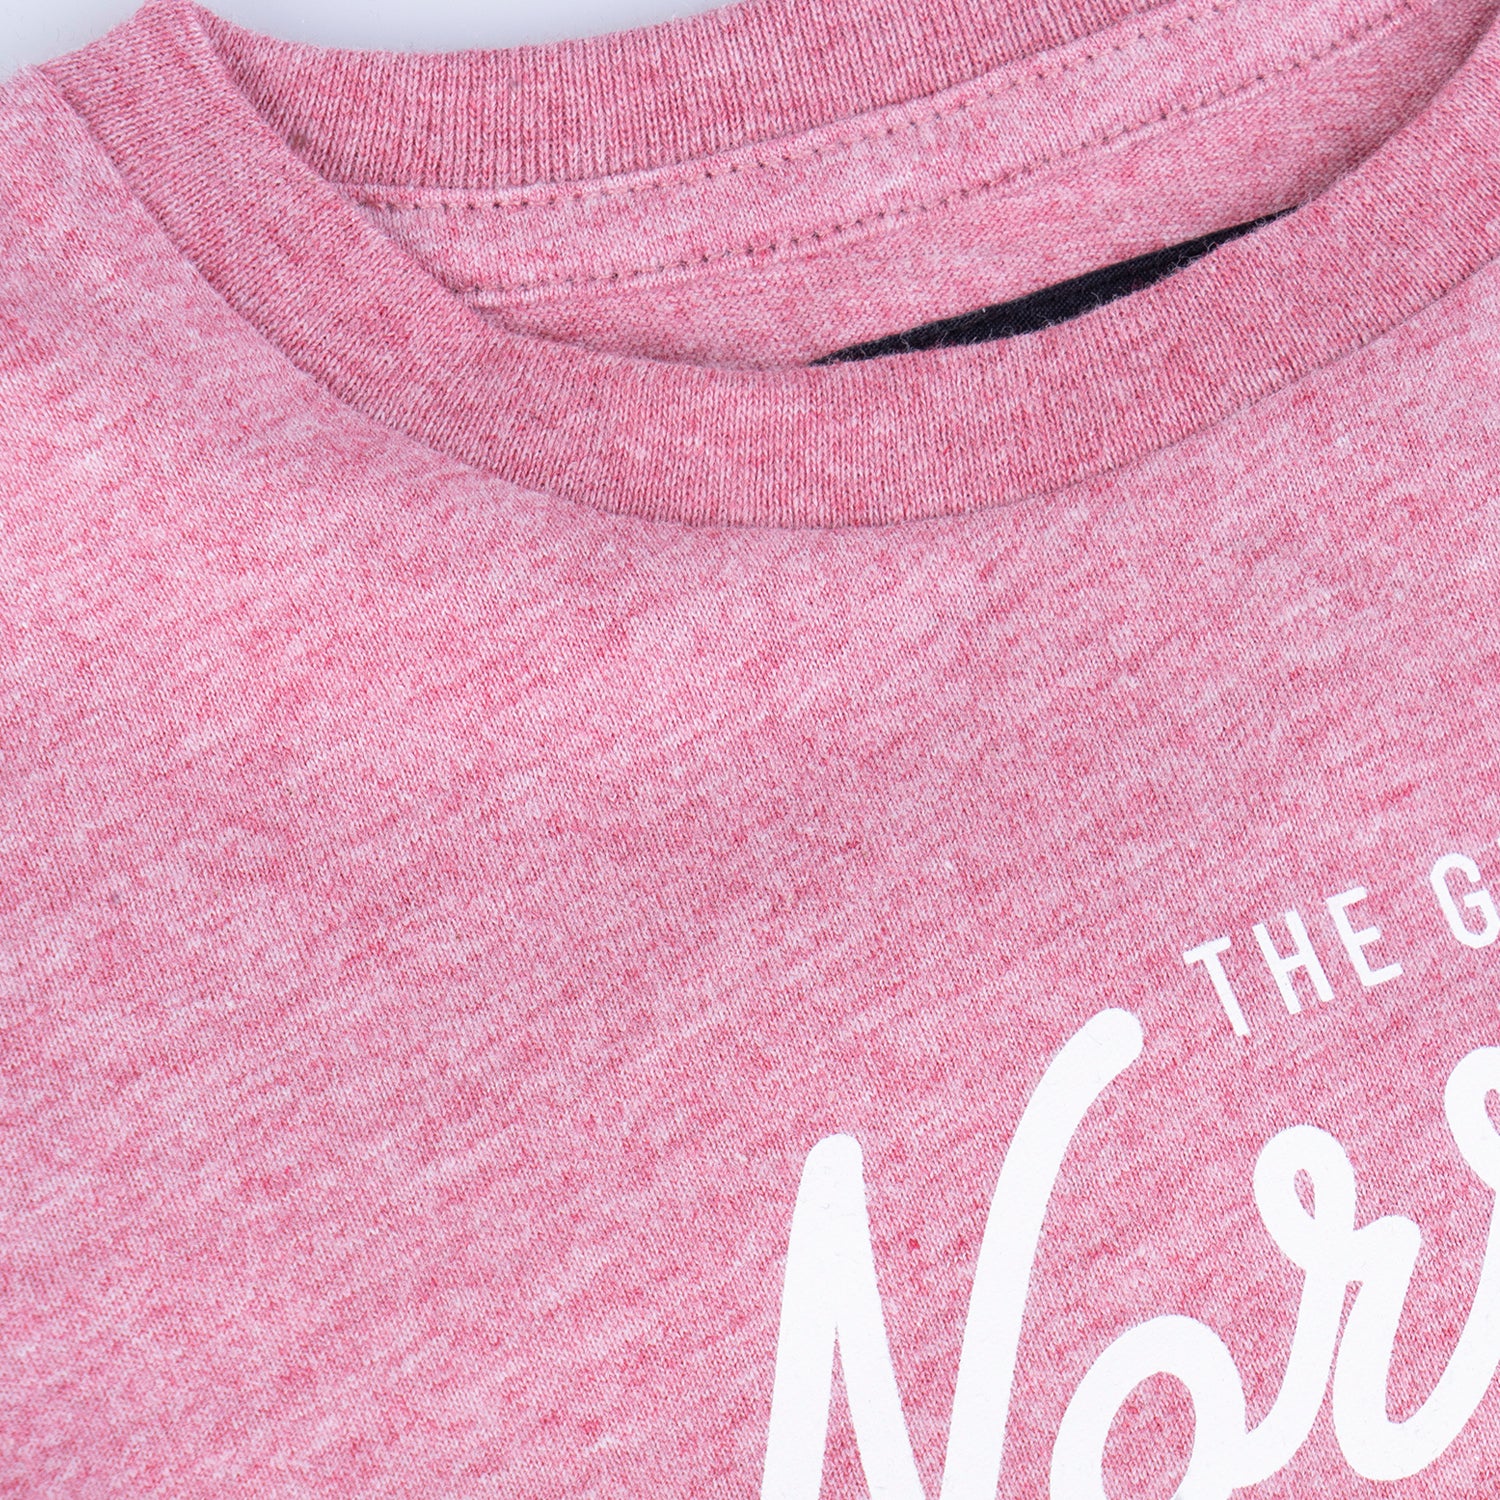 GREAT NORRLAND KIDS T-SHIRT - PINK